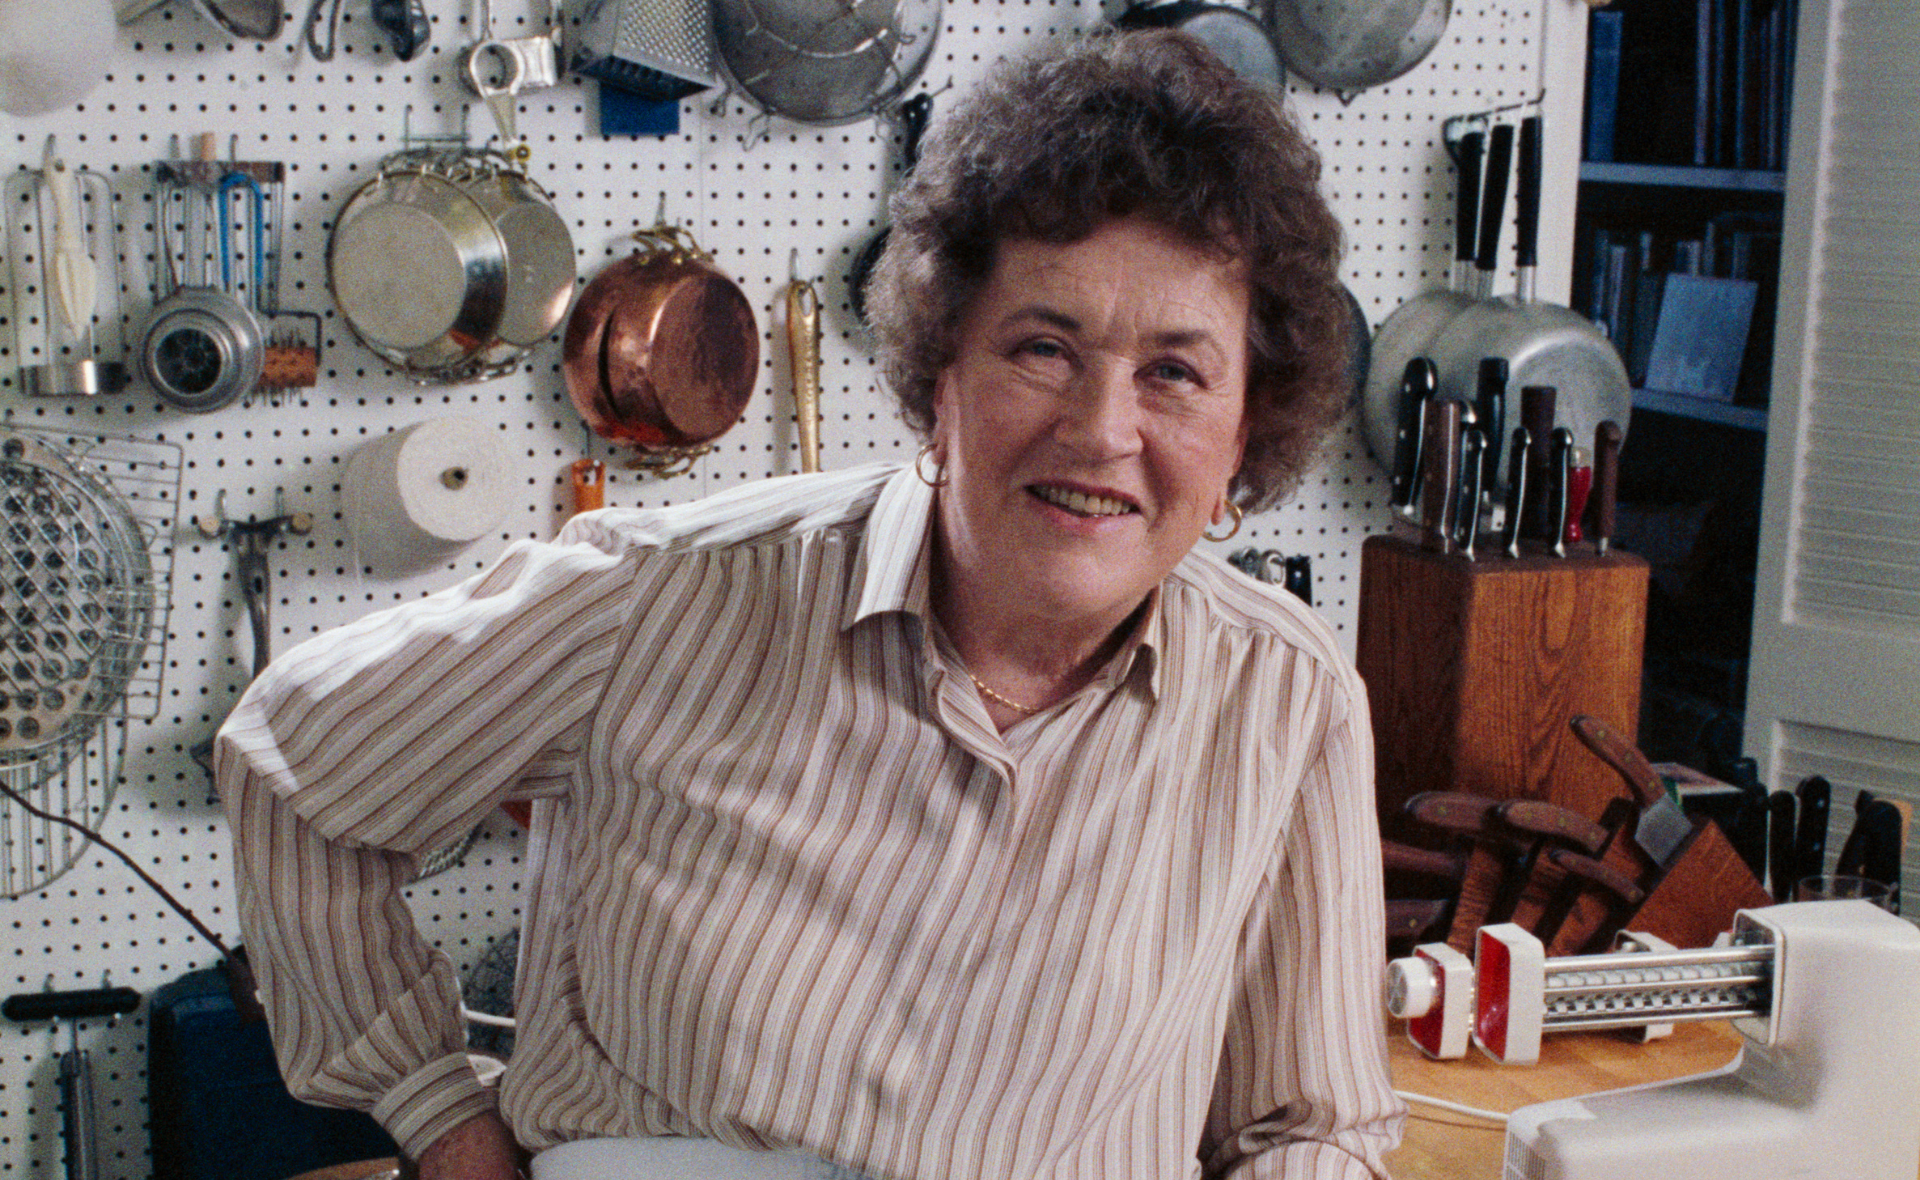 EXCLUSIVE: The incredible true story behind the new HBO show inspired by Julia Child